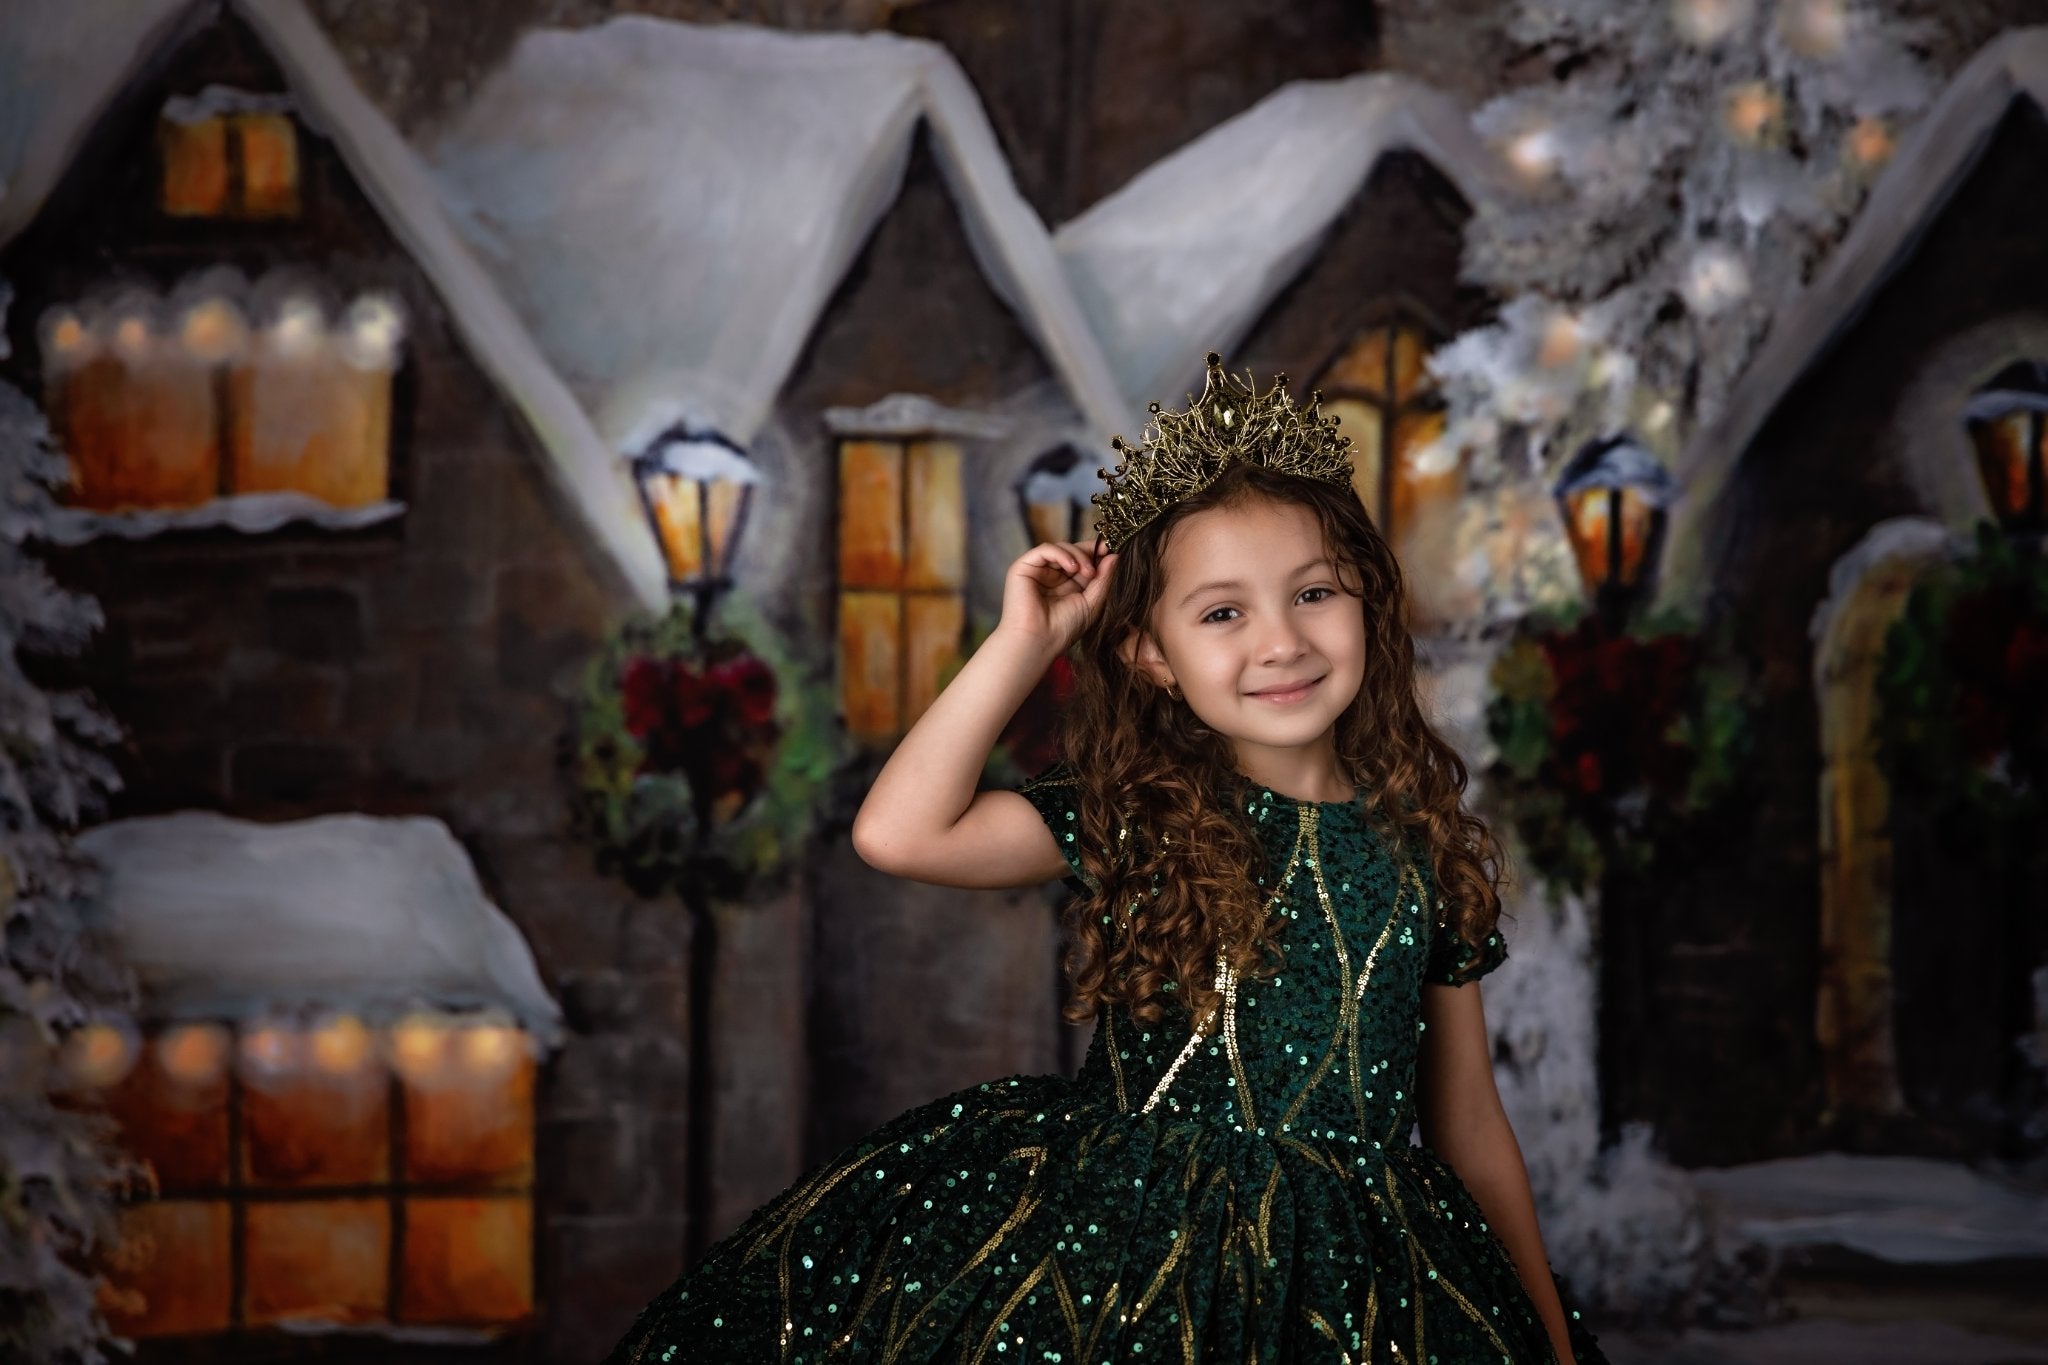 Couture rental gown: "Nutcracker Dance" - Green high low  With Sleeve Option Petal Length Dress  ( 4 Year - Petite 5 Year)